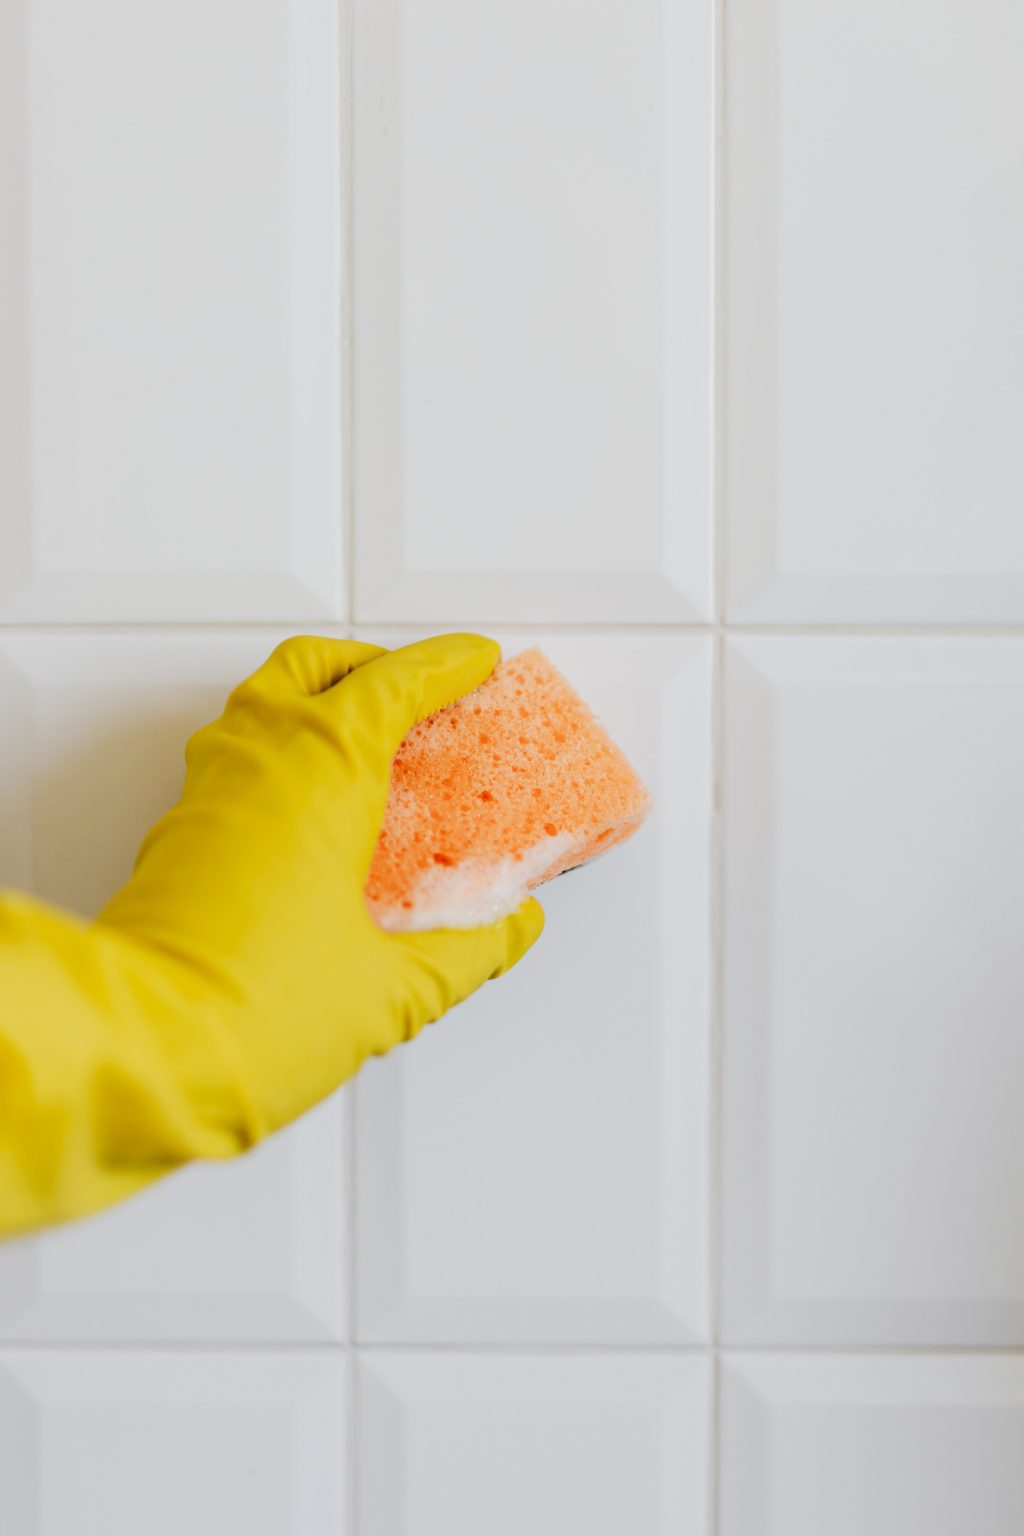 Cleaning tricks you didn’t know